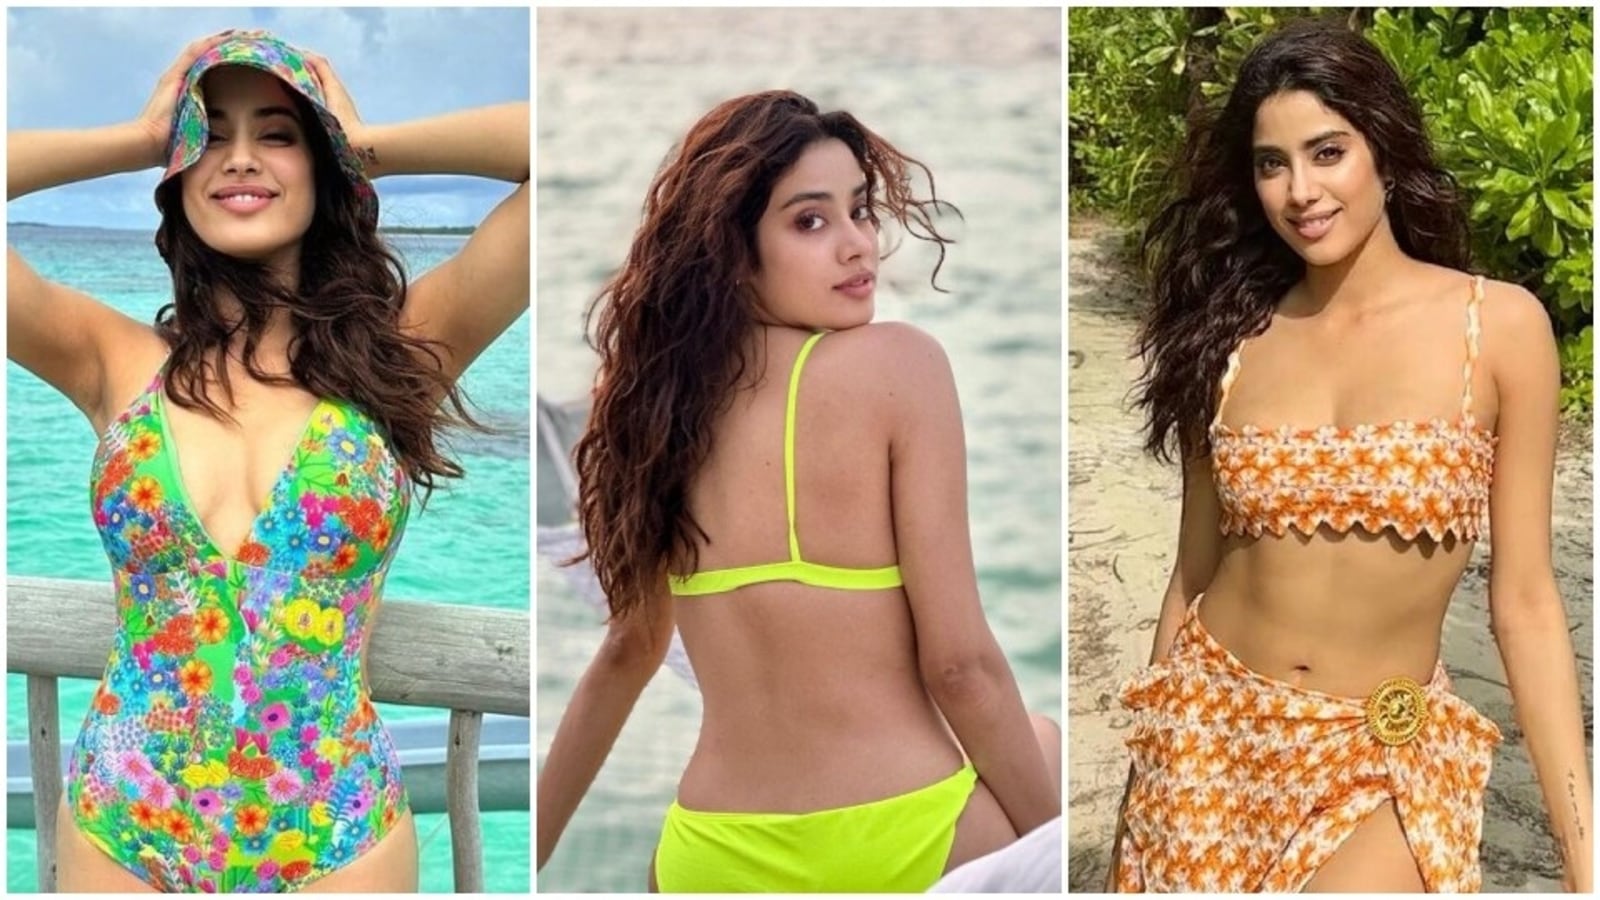 Rhea Sharma Sex Hd Pic - Janhvi Kapoor in beach-ready swimsuits and backless dress at Maldives is  gorgeous as the clear blue sea: All pics | Fashion Trends - Hindustan Times